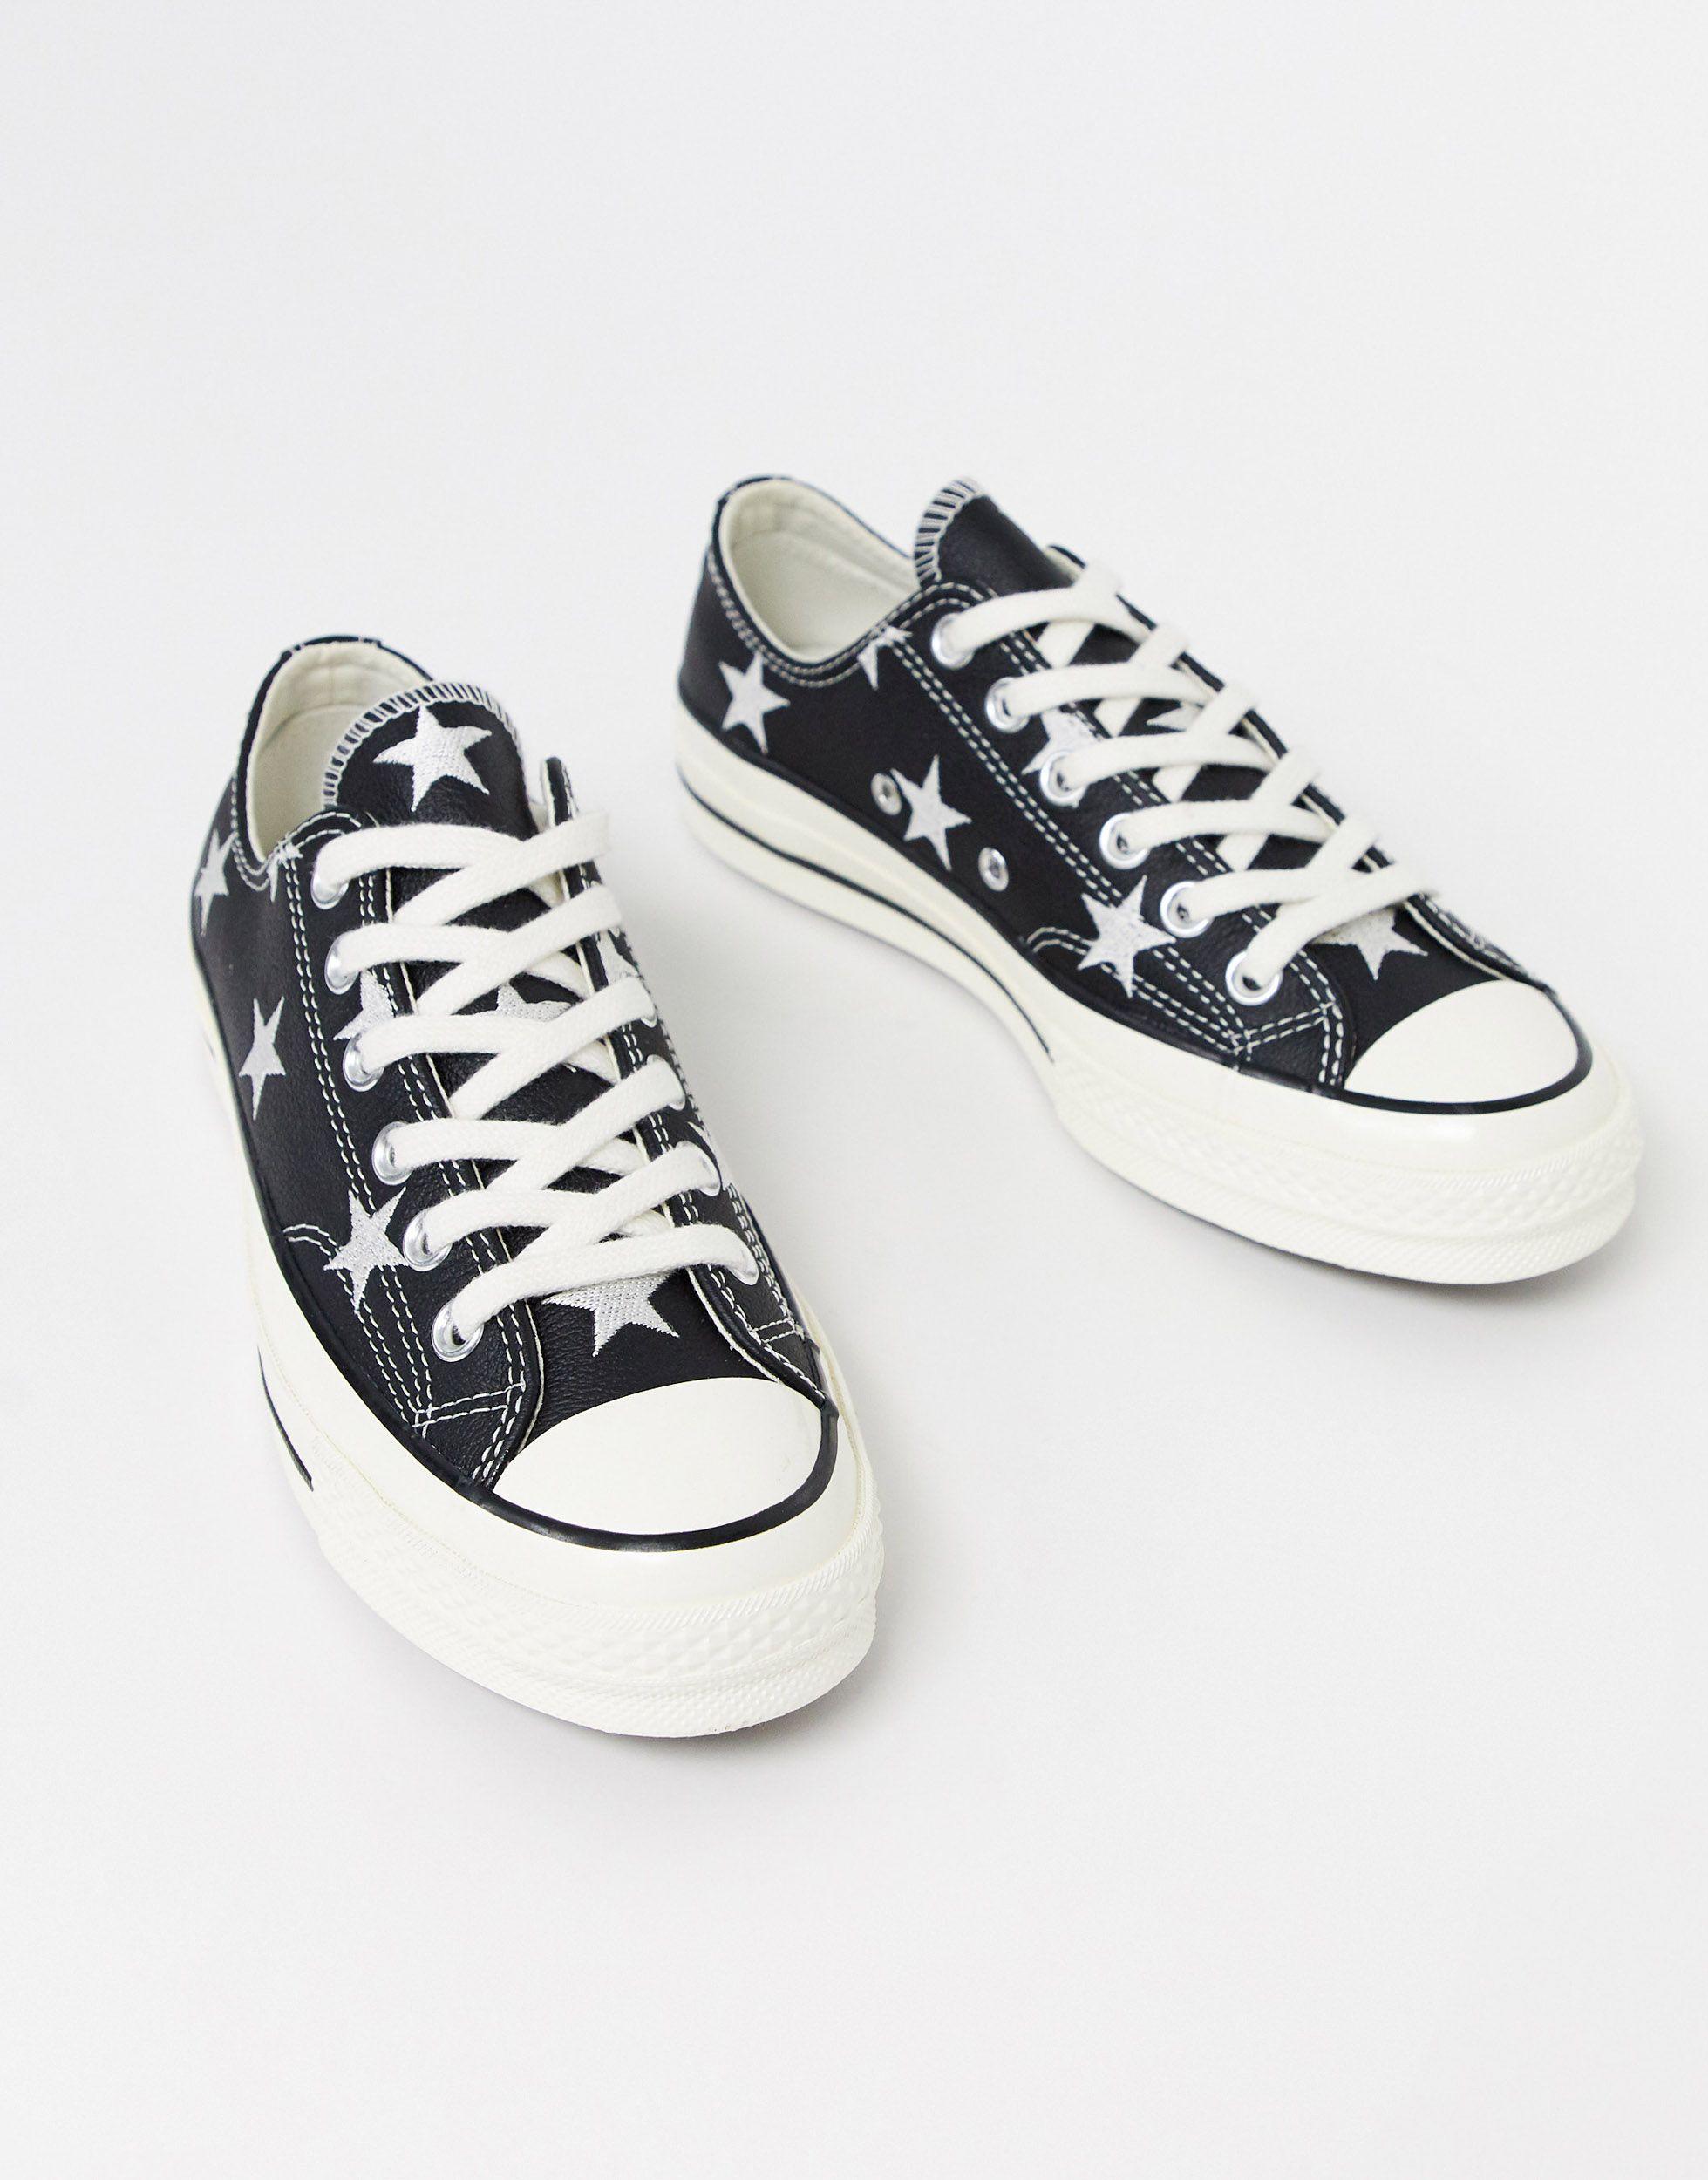 Converse Chuck 70 Black Leather Sneakers With Embroidered Stars